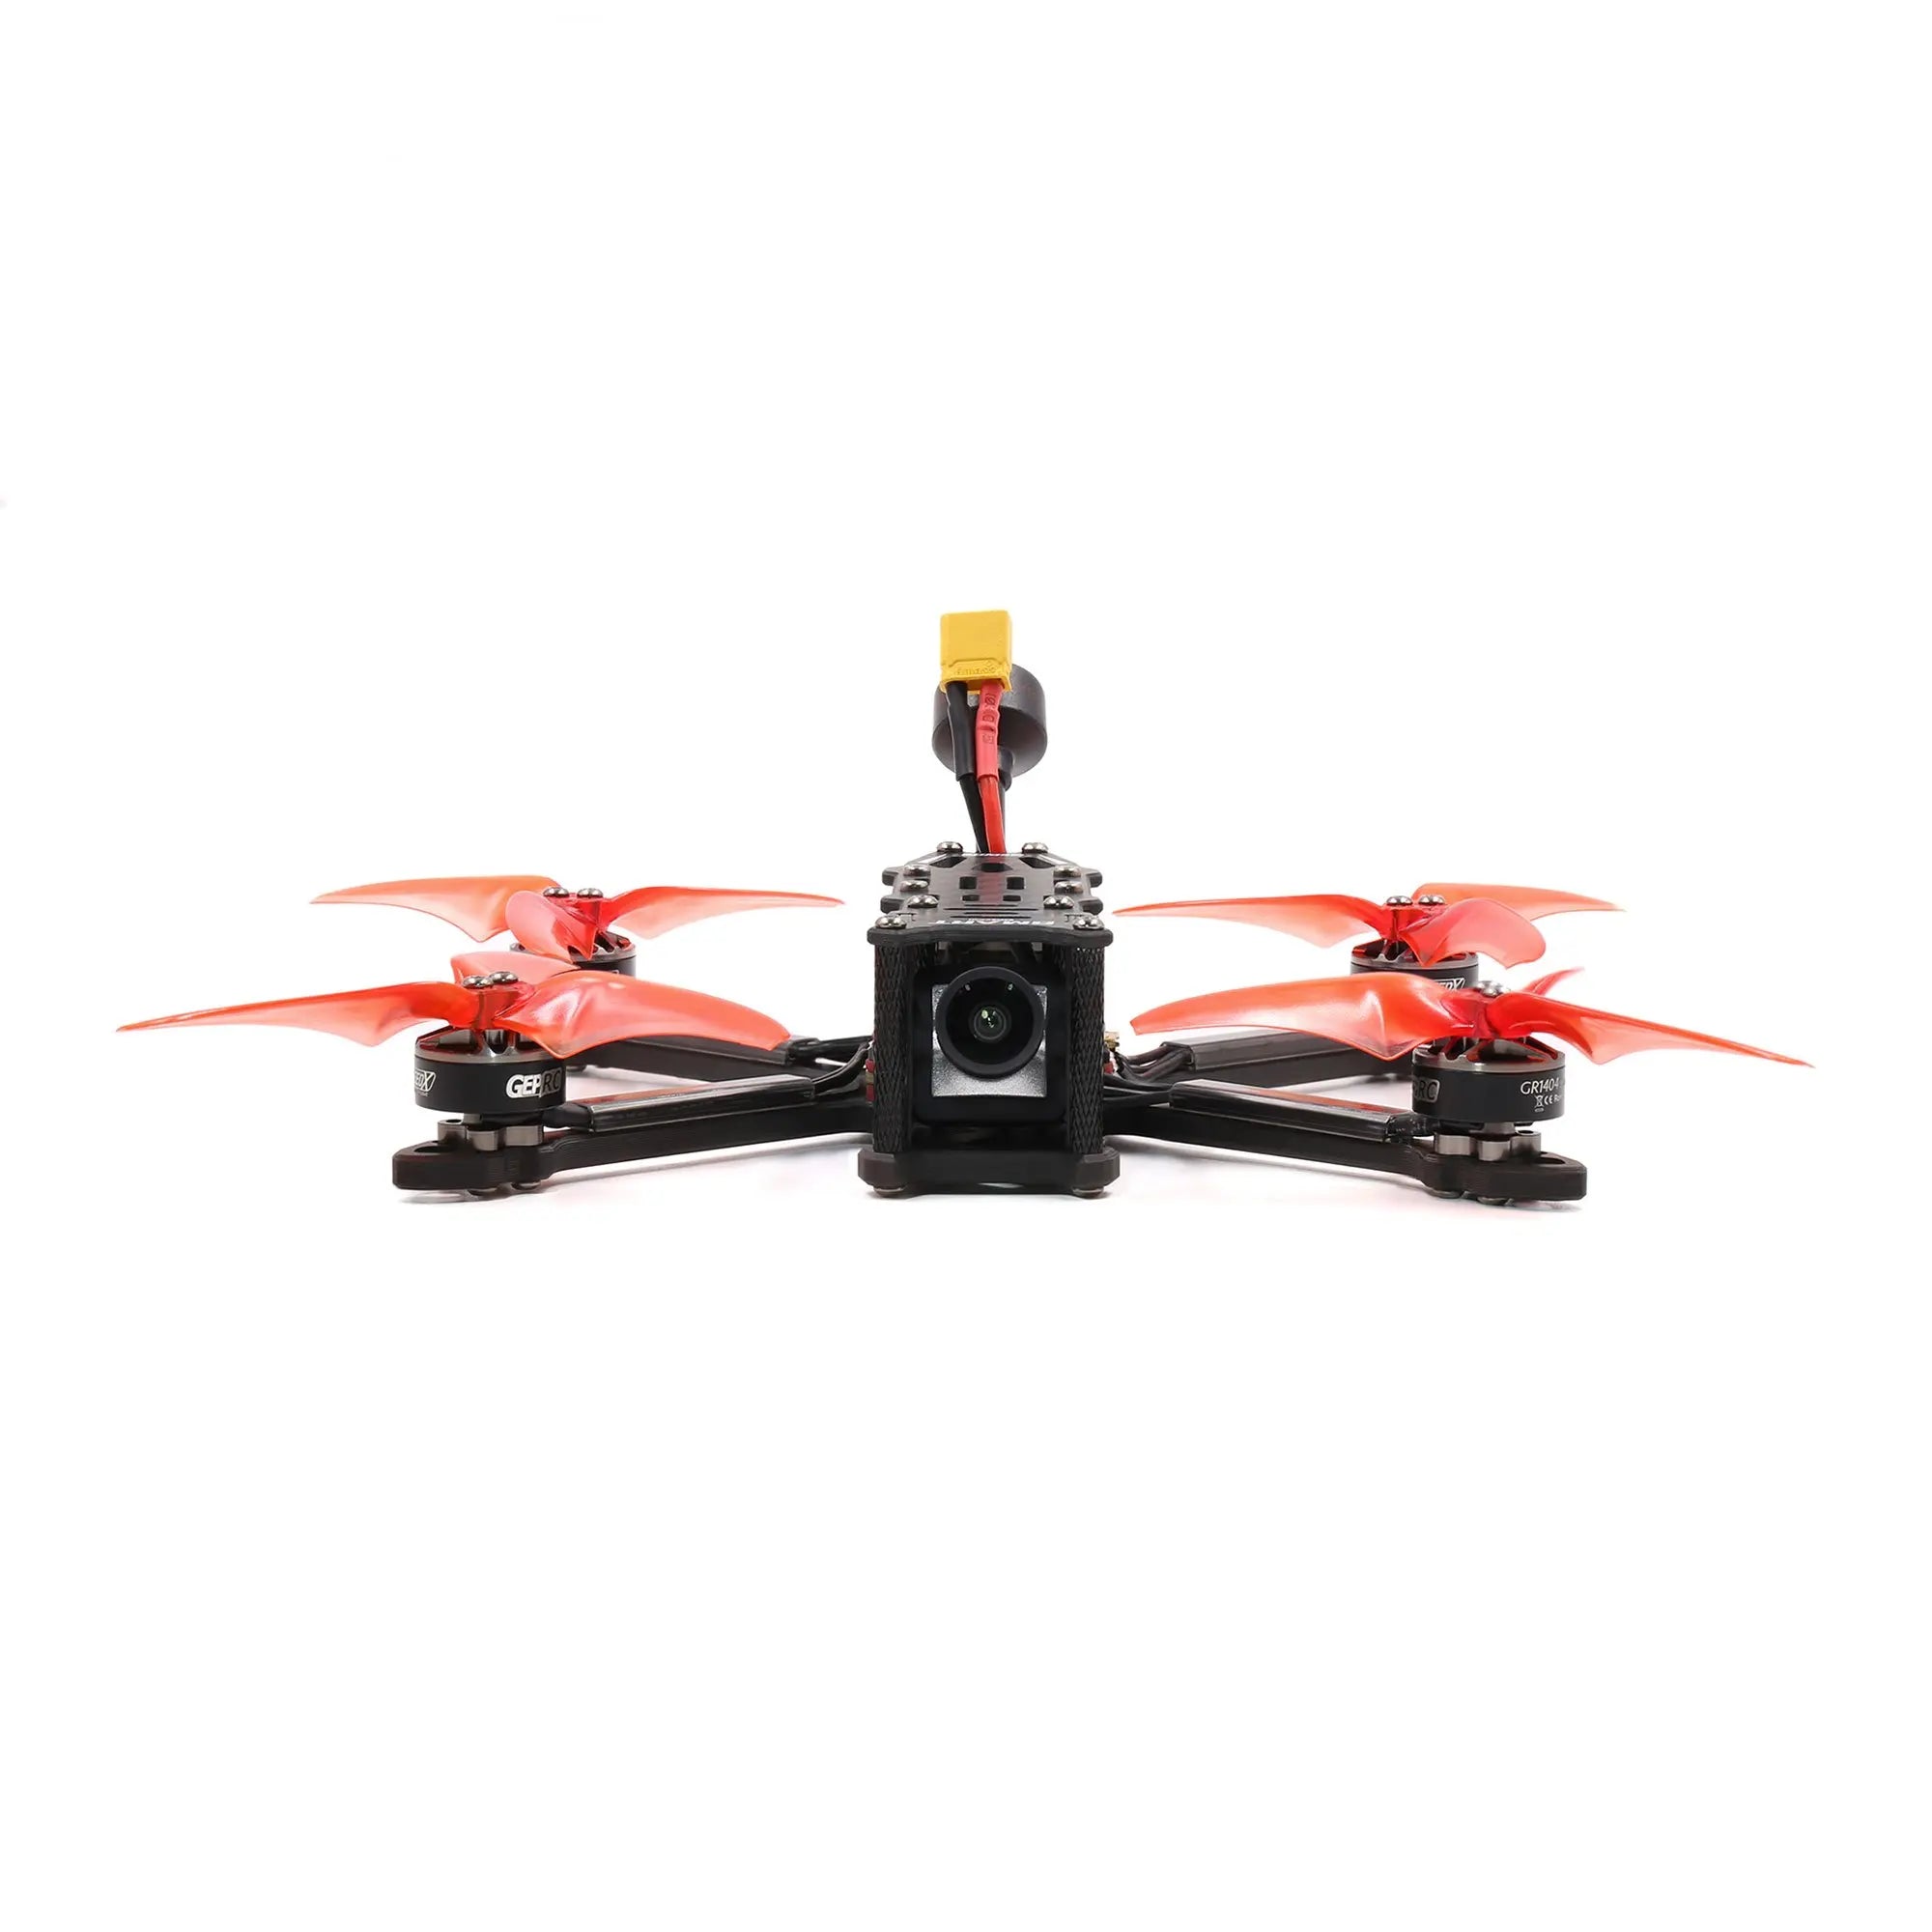 GEPRC SMART 35 FPV Drone, Using the mainstream F411 AIO flight system, the electronic system runs more stab